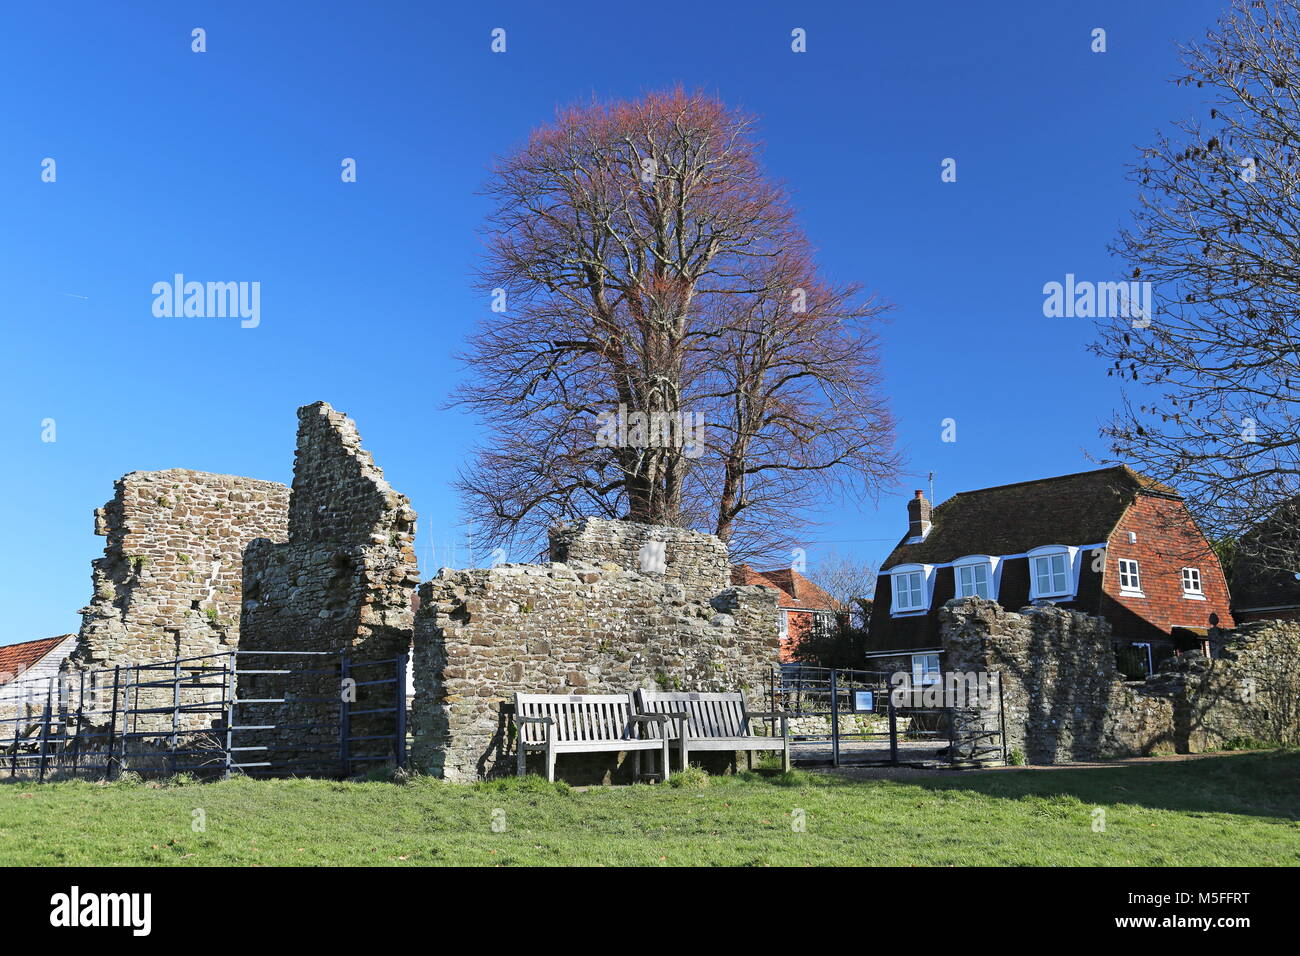 Remains of Blackfriars Barn (from PRW), Rectory Lane, Winchelsea, East Sussex, England, Great Britain, United Kingdom, UK, Europe Stock Photo